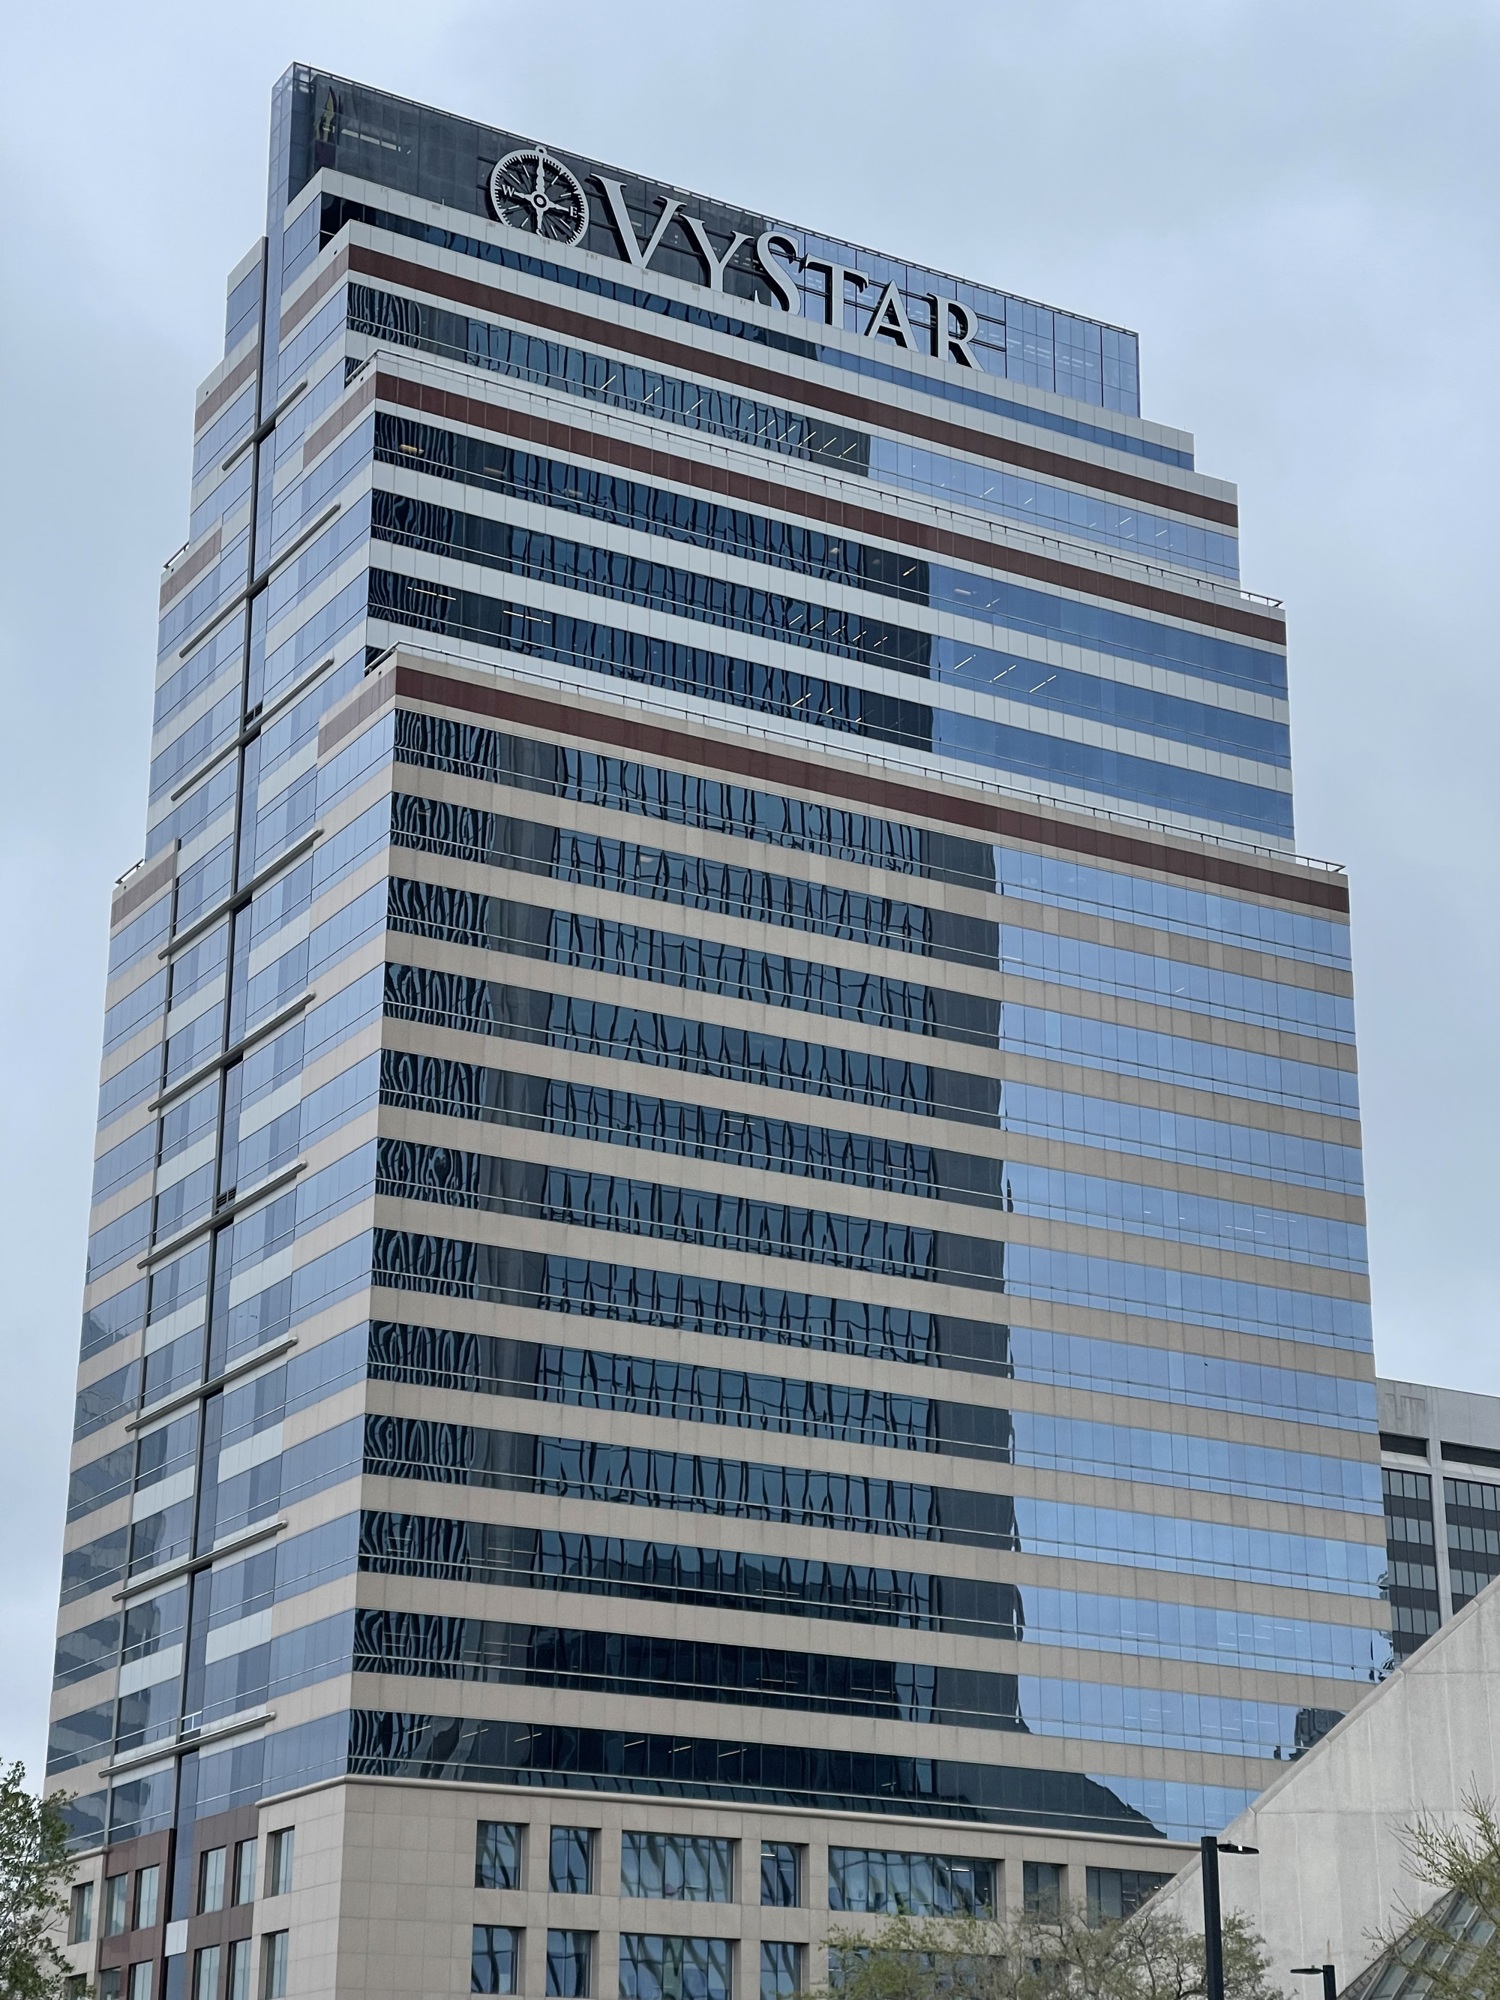 The new law school will be inside VyStar Tower Downtown.